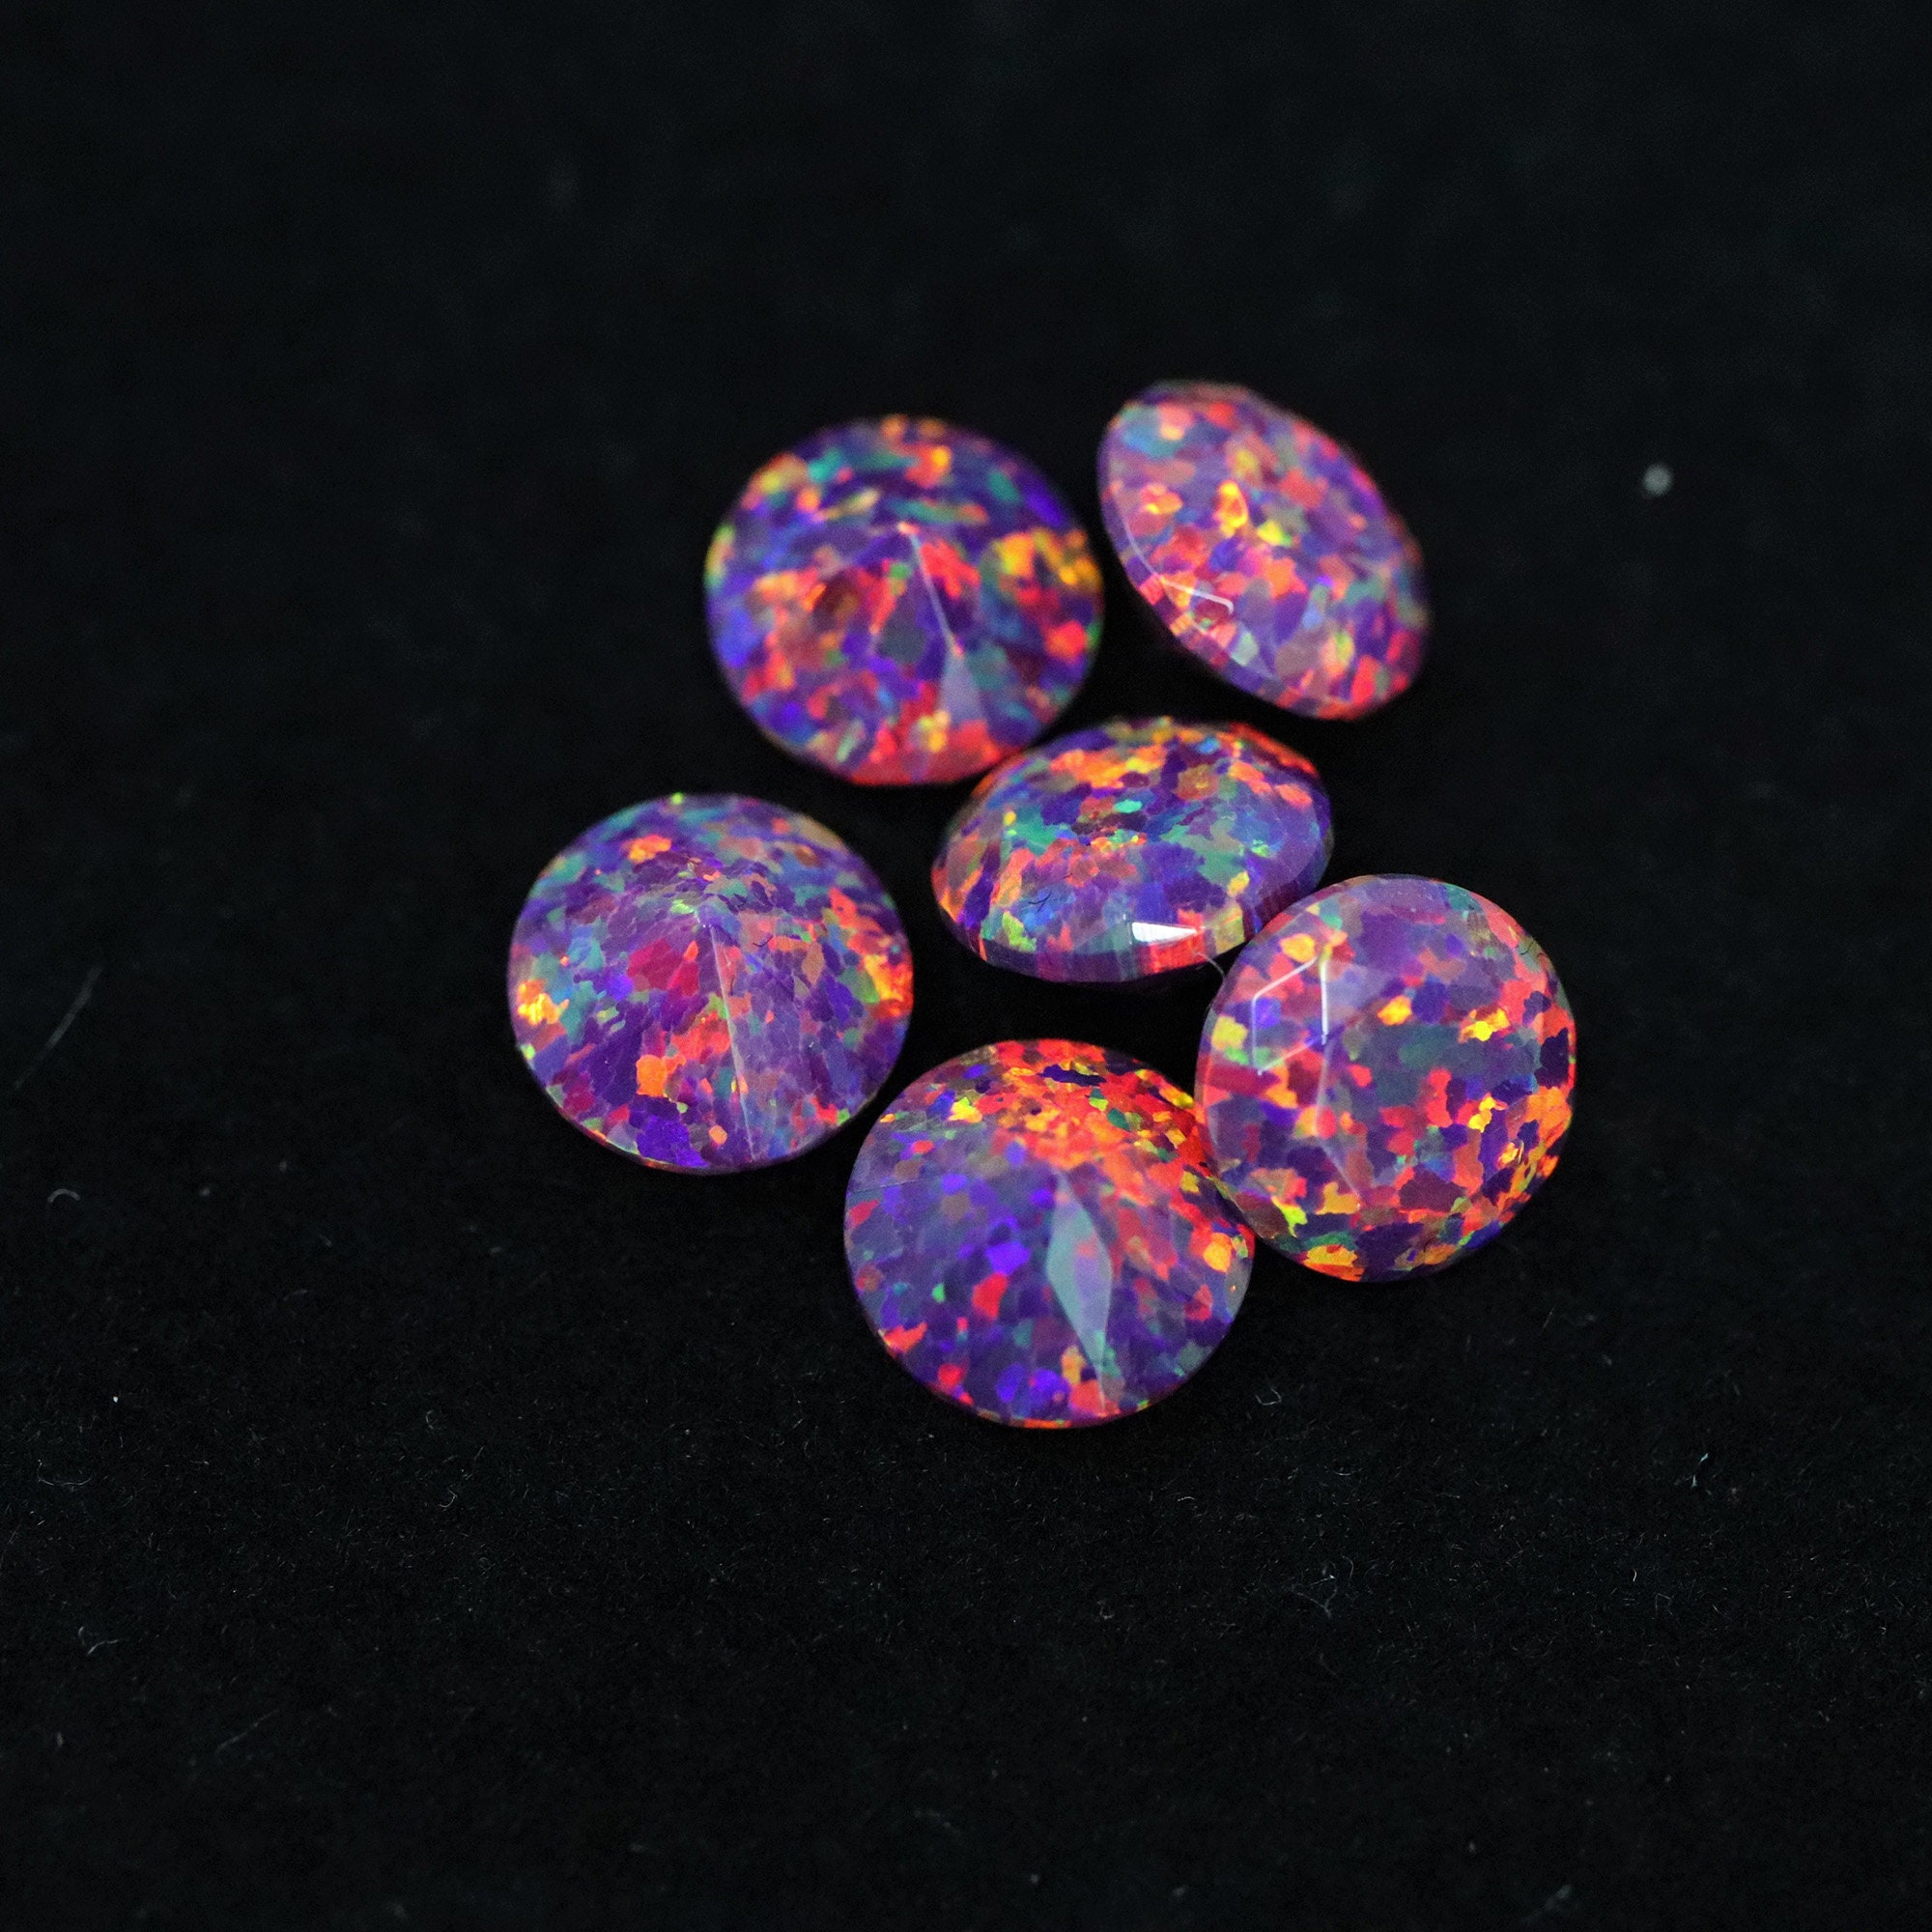 Black Emerald Opal Beads, 4mm/6mm/8mm/10mm Opal Beads, 1mm Fully Drilled  Round Bead Green Craft Bead, Jewelry Making, Crafts, Opal Pendant 